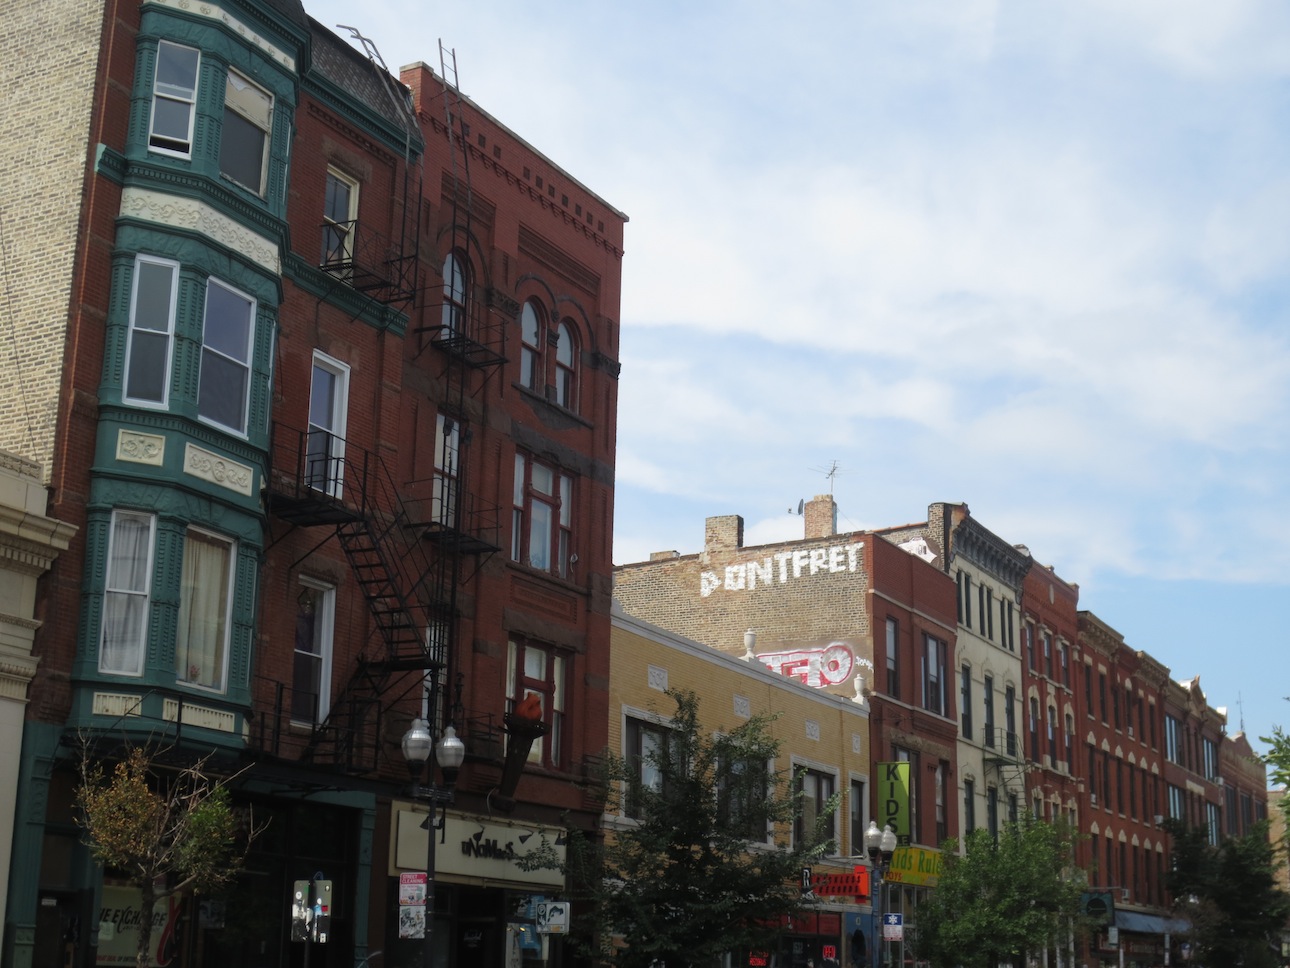 A view of three buildings in Wicker Park.